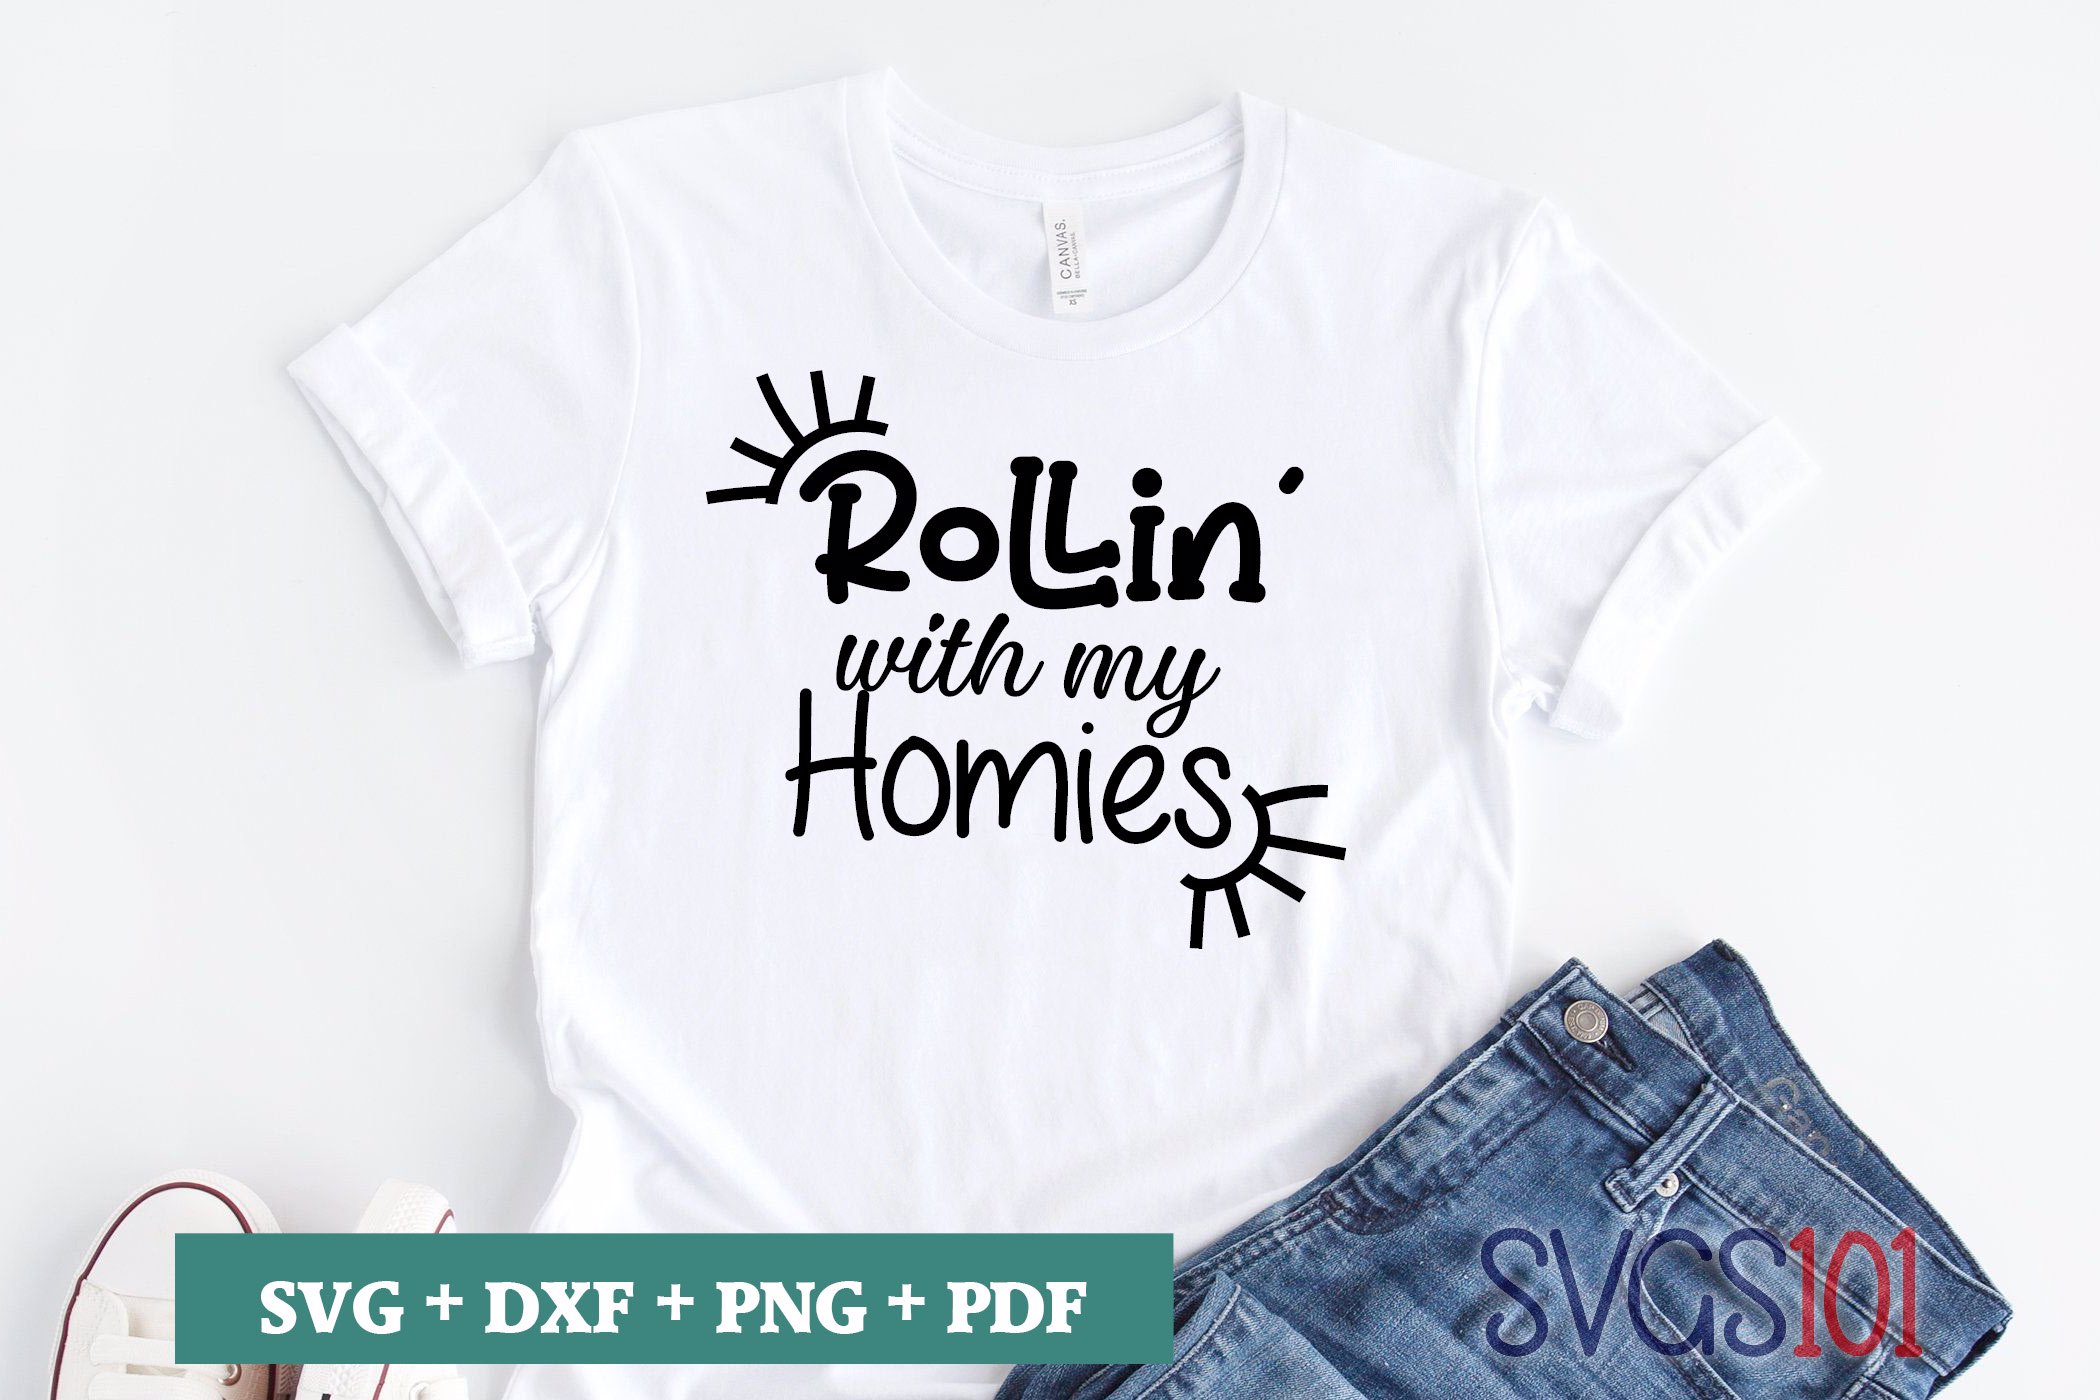 Download Rollin' With My Homies SVG Cuttable file - DXF, EPS, PNG ...